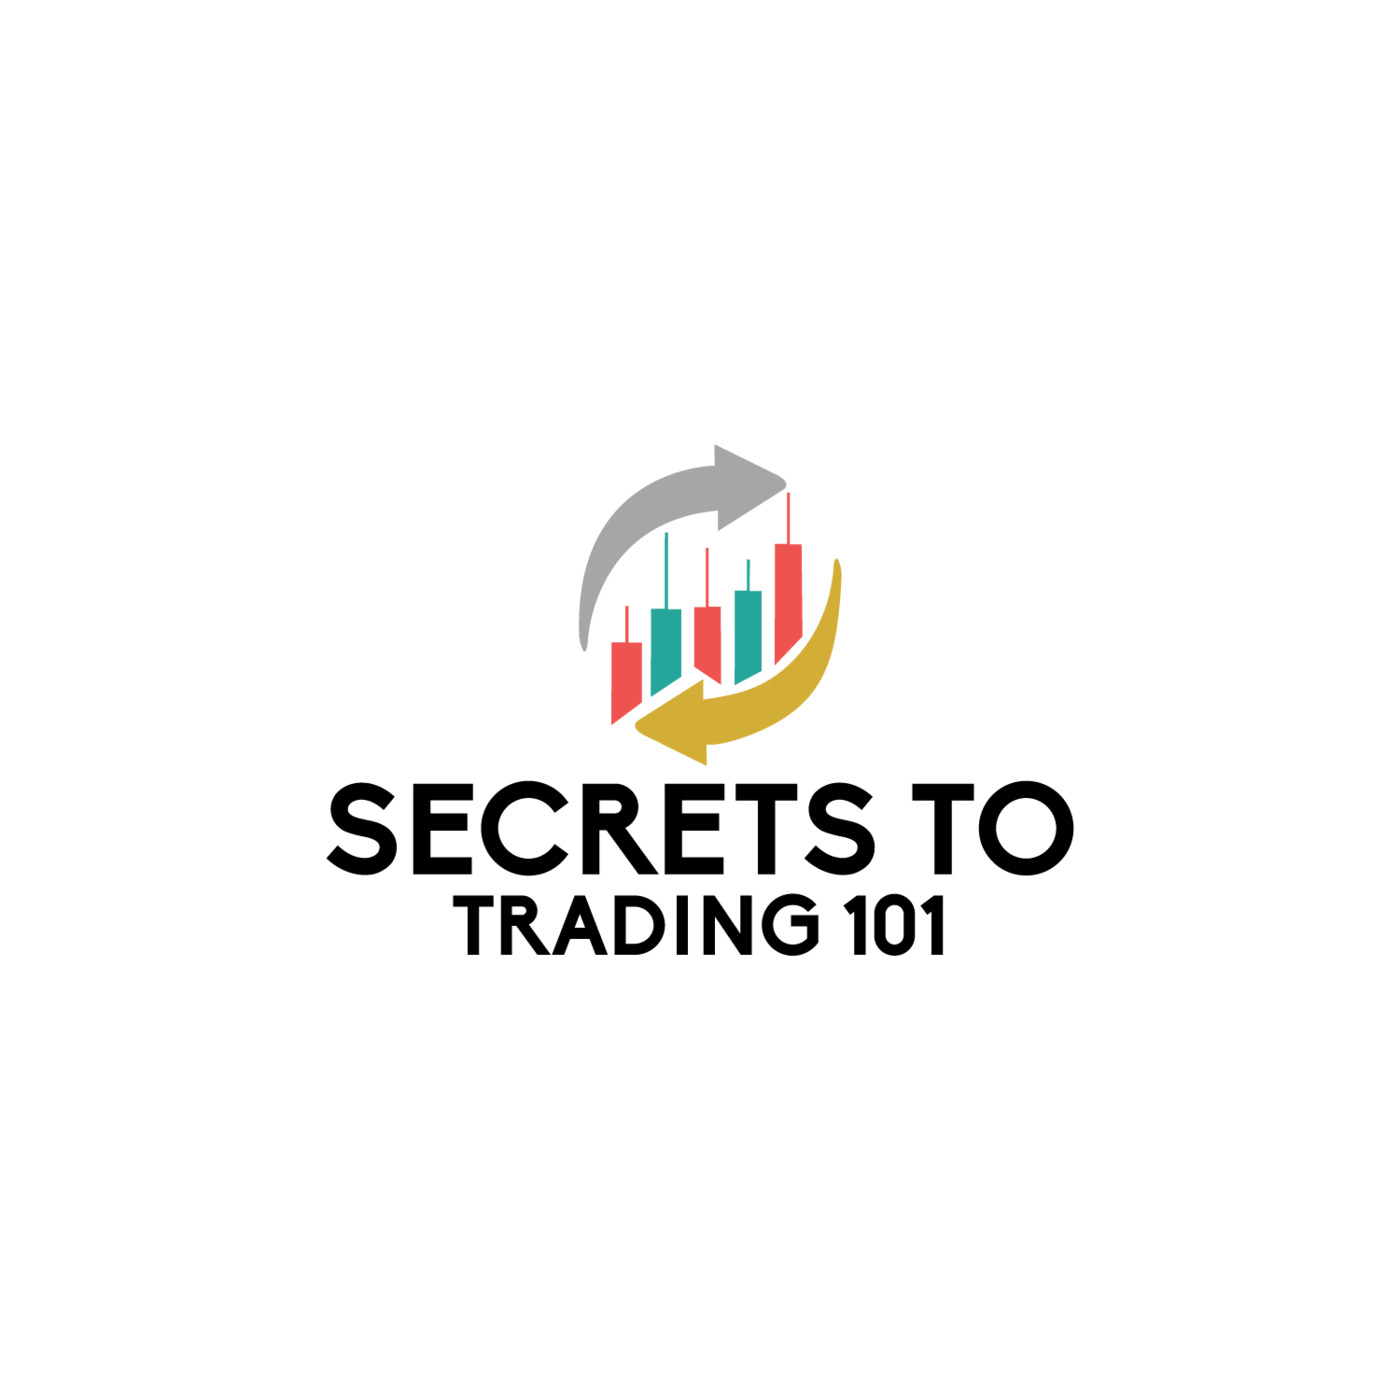 Secrets to Trading 101 is a platform providing expert insights to traders and investors in forex, crypto, and overall trading strategies.